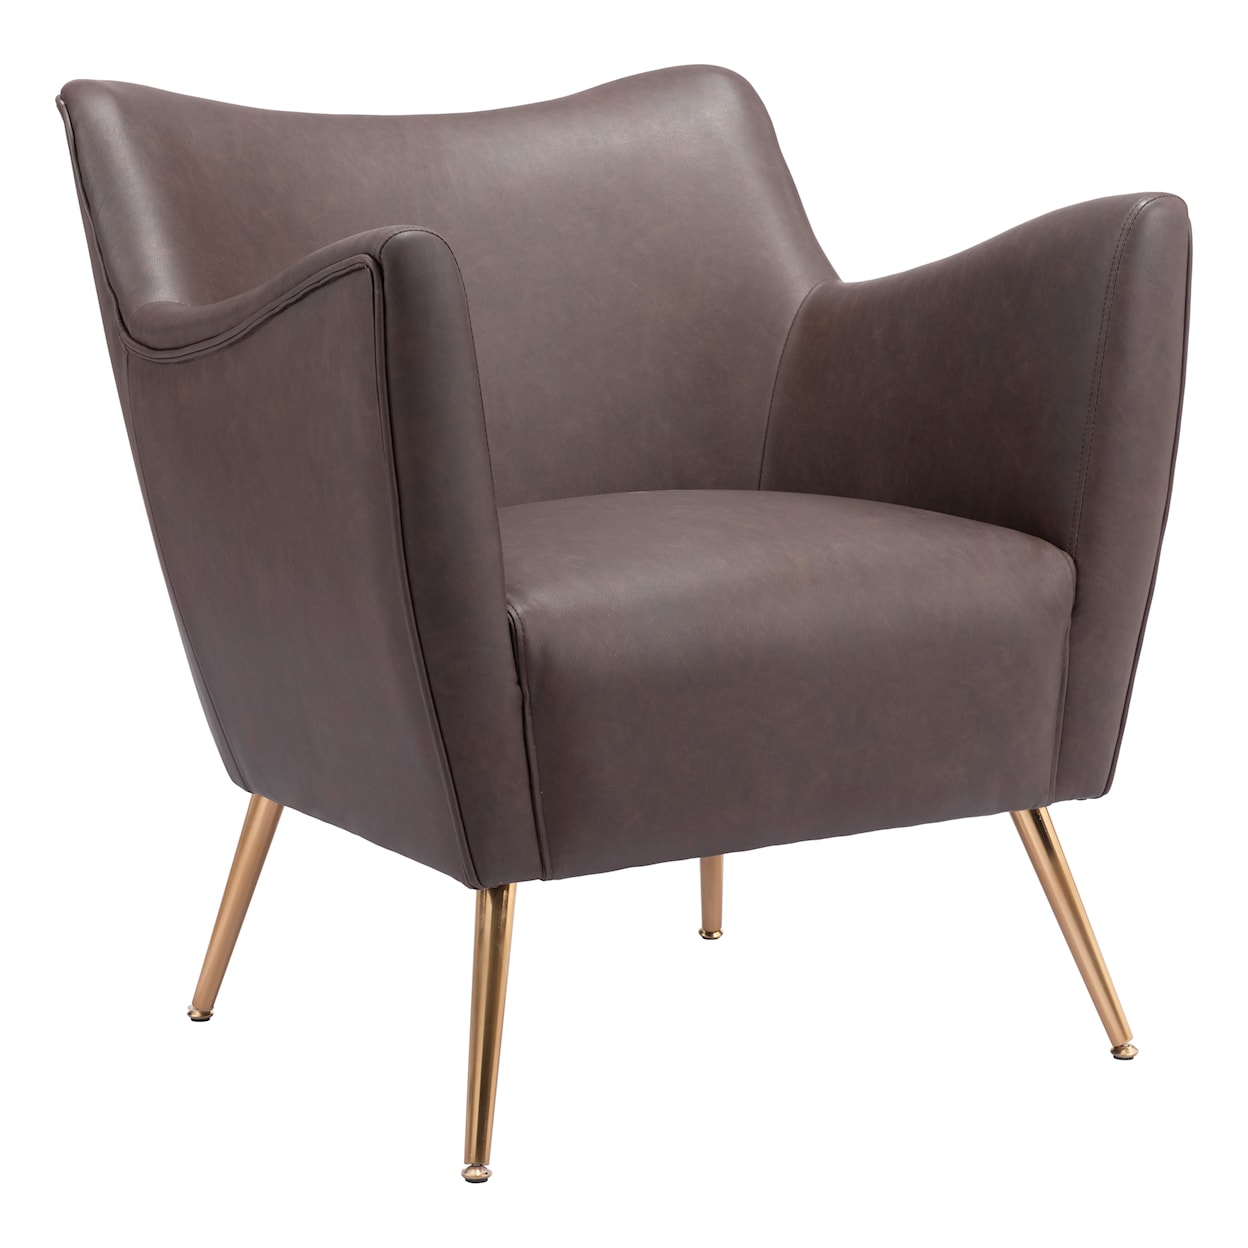 Zuo Zoco Accent Chair